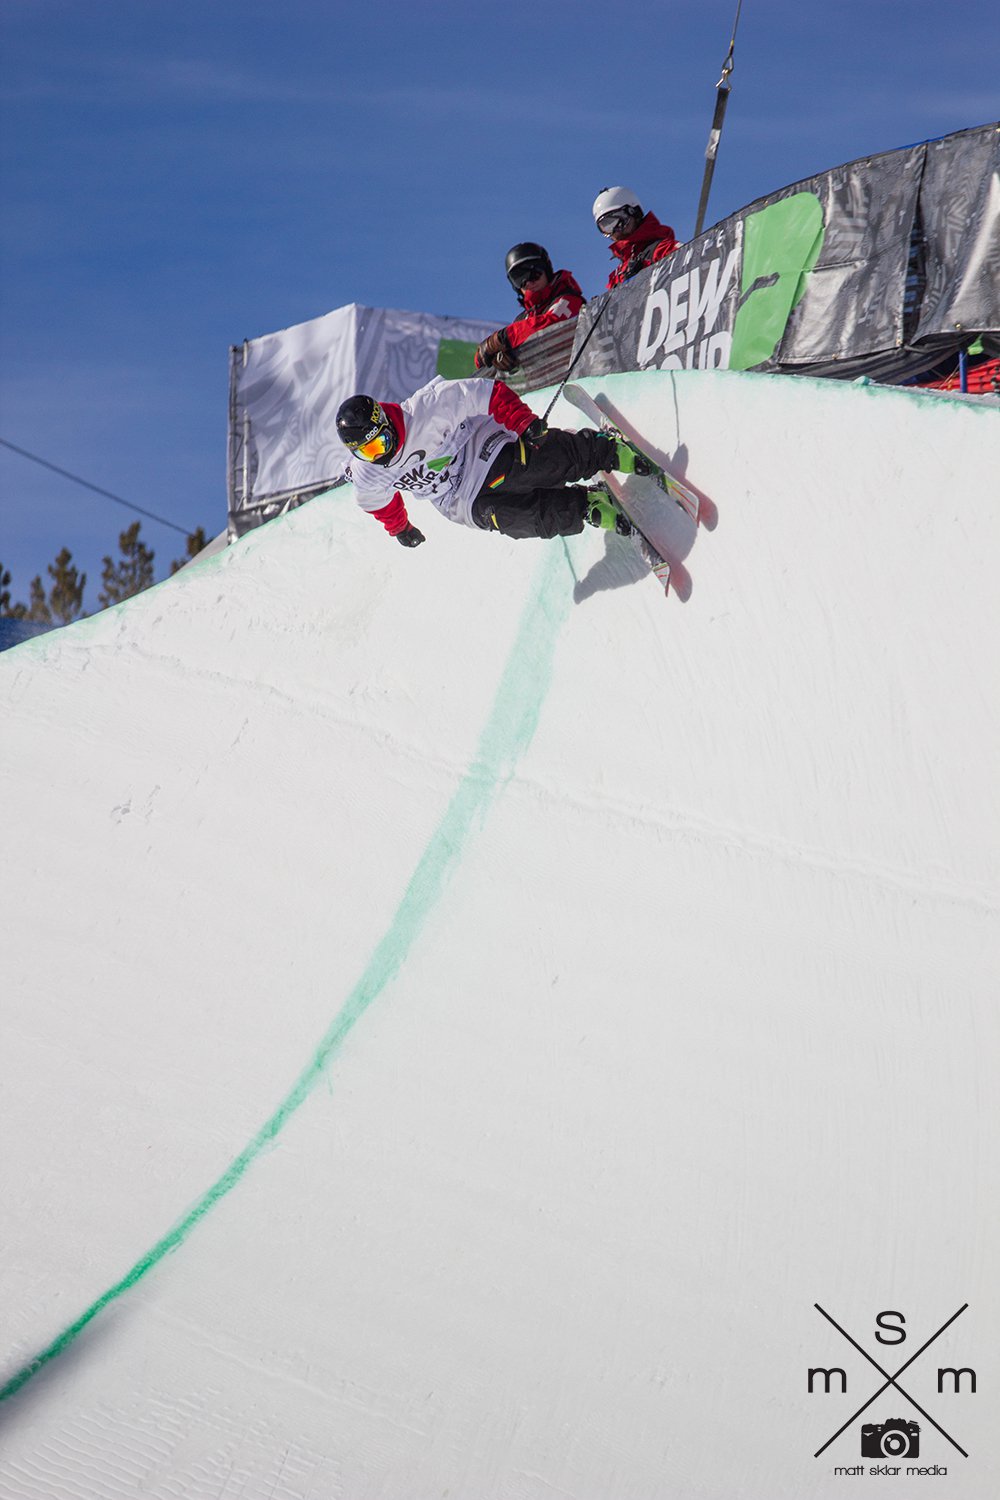 THall Dropping in @ Dew Tour